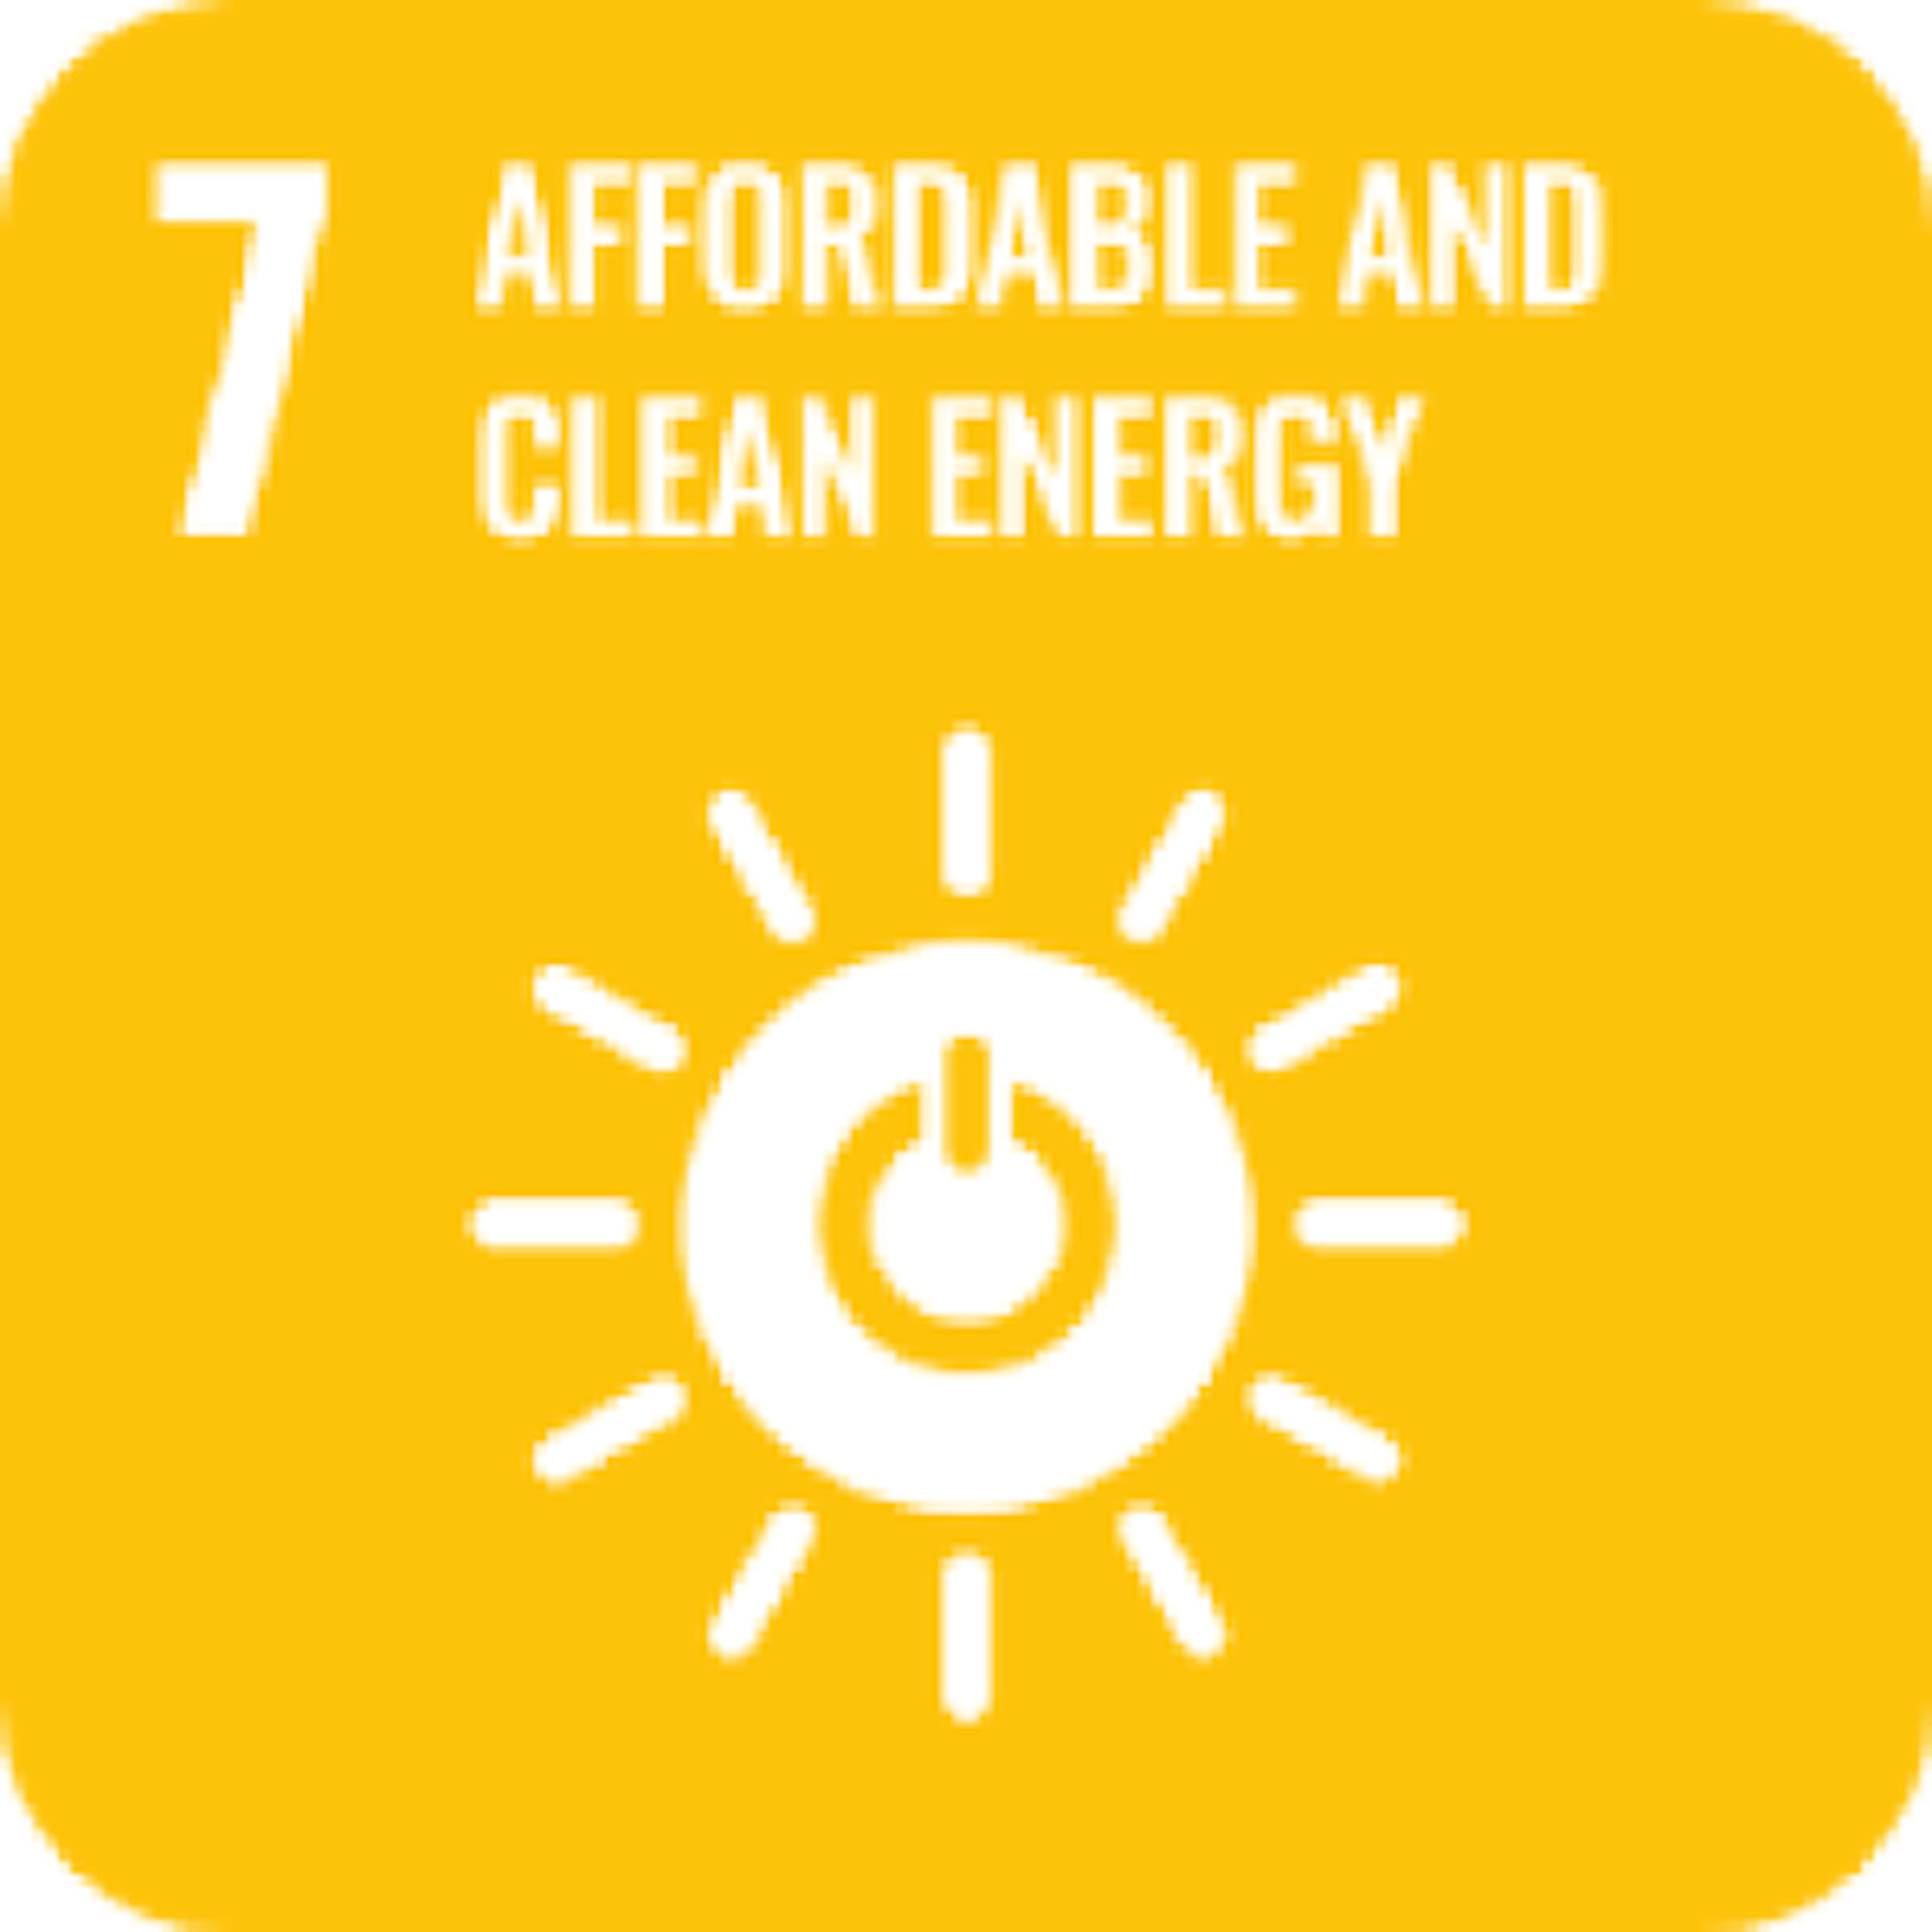 7 affordable and clean energy